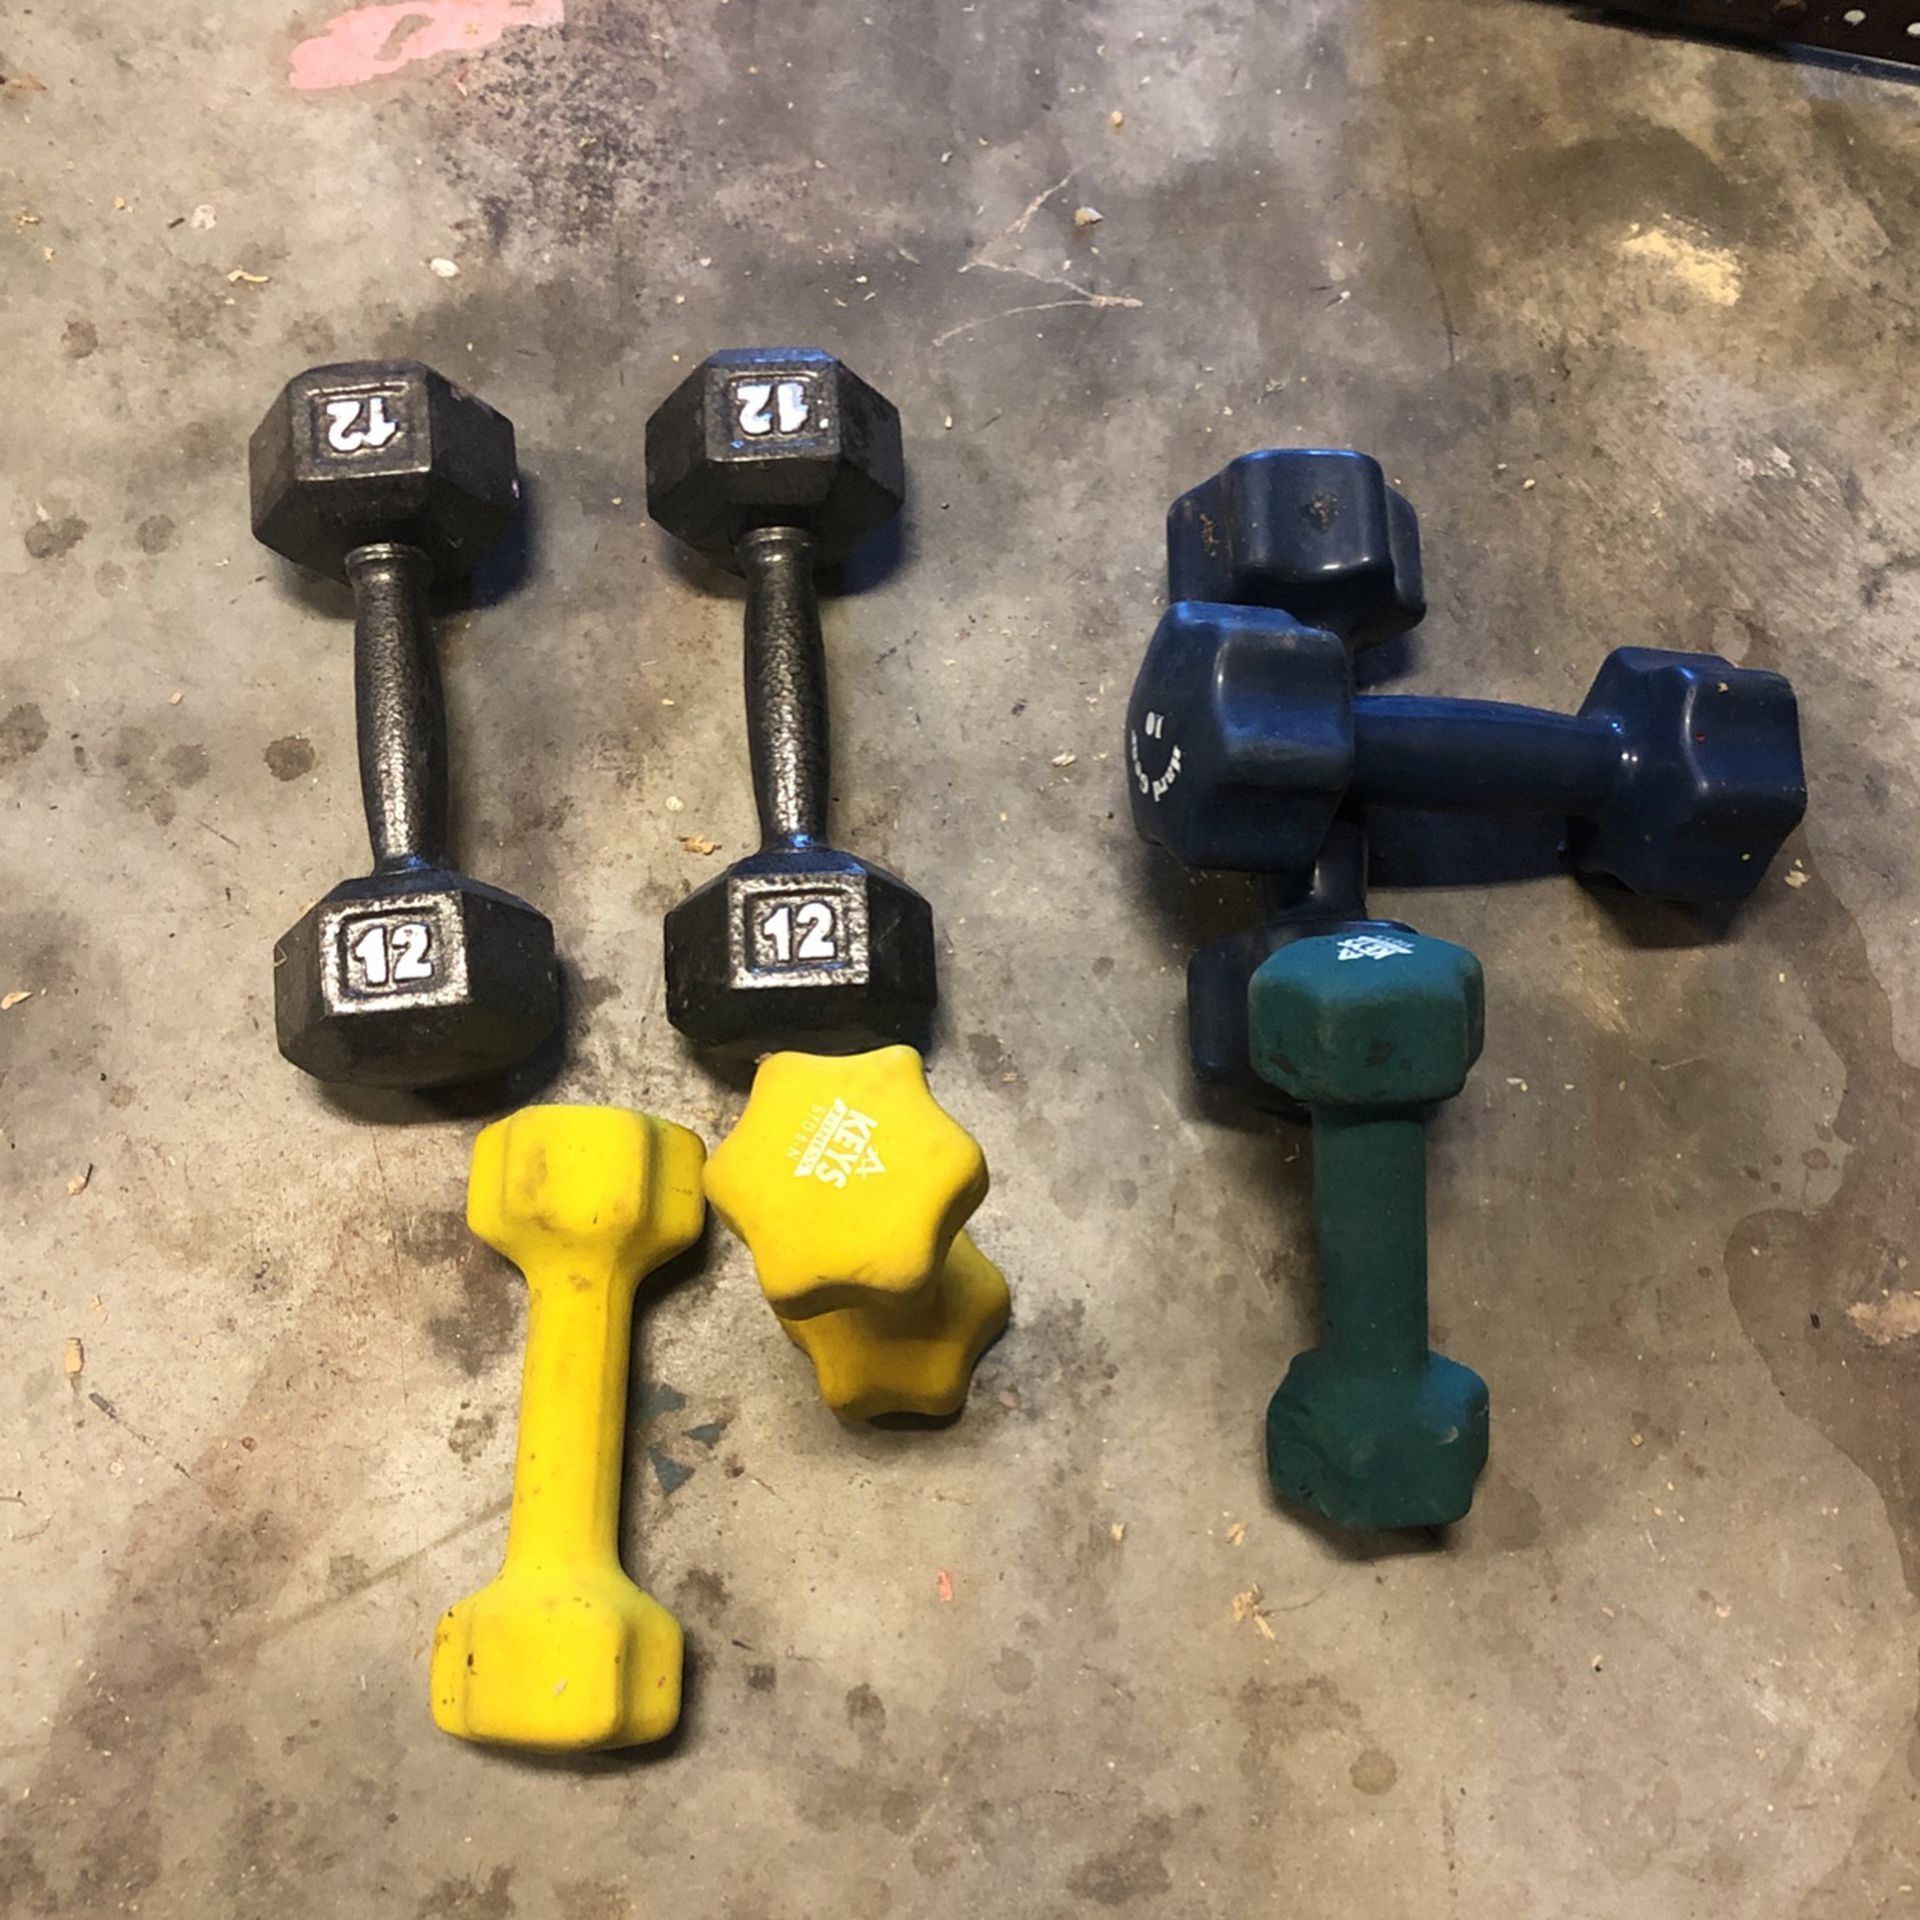 Exercise Weights Near 4042